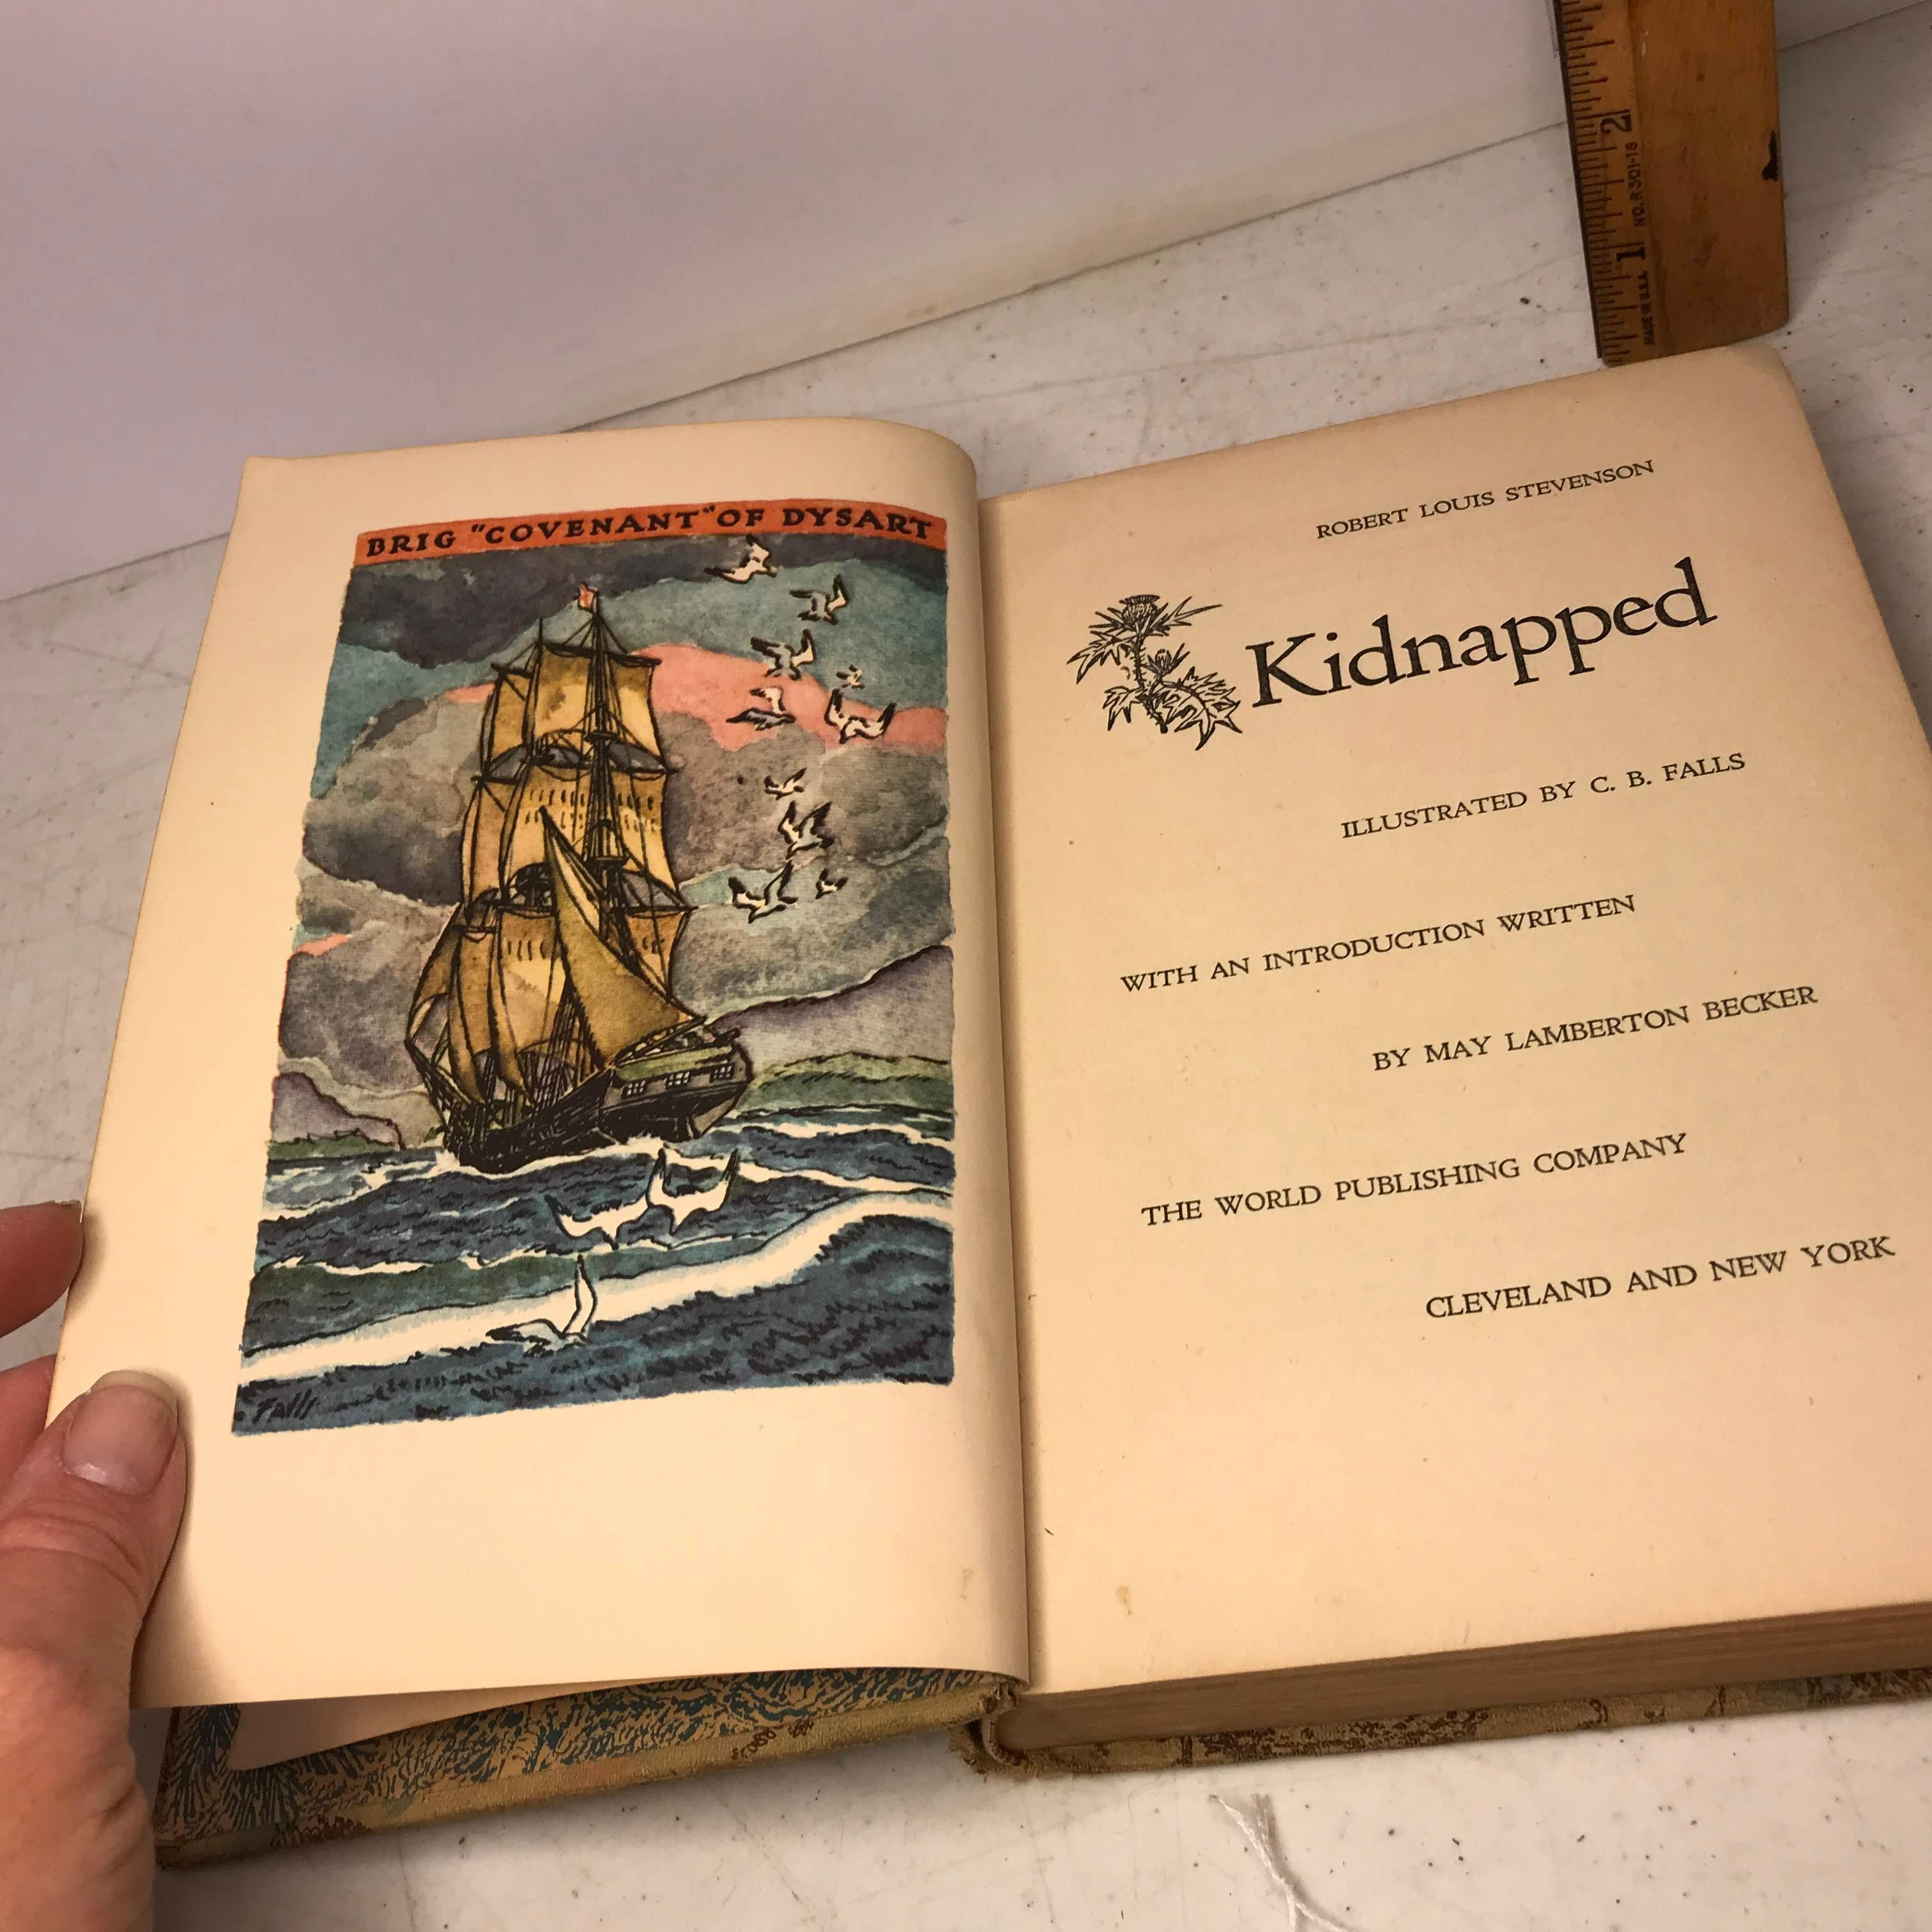 1947 “Kidnapped” by Robert Louis Stephenson Hard Cover Book